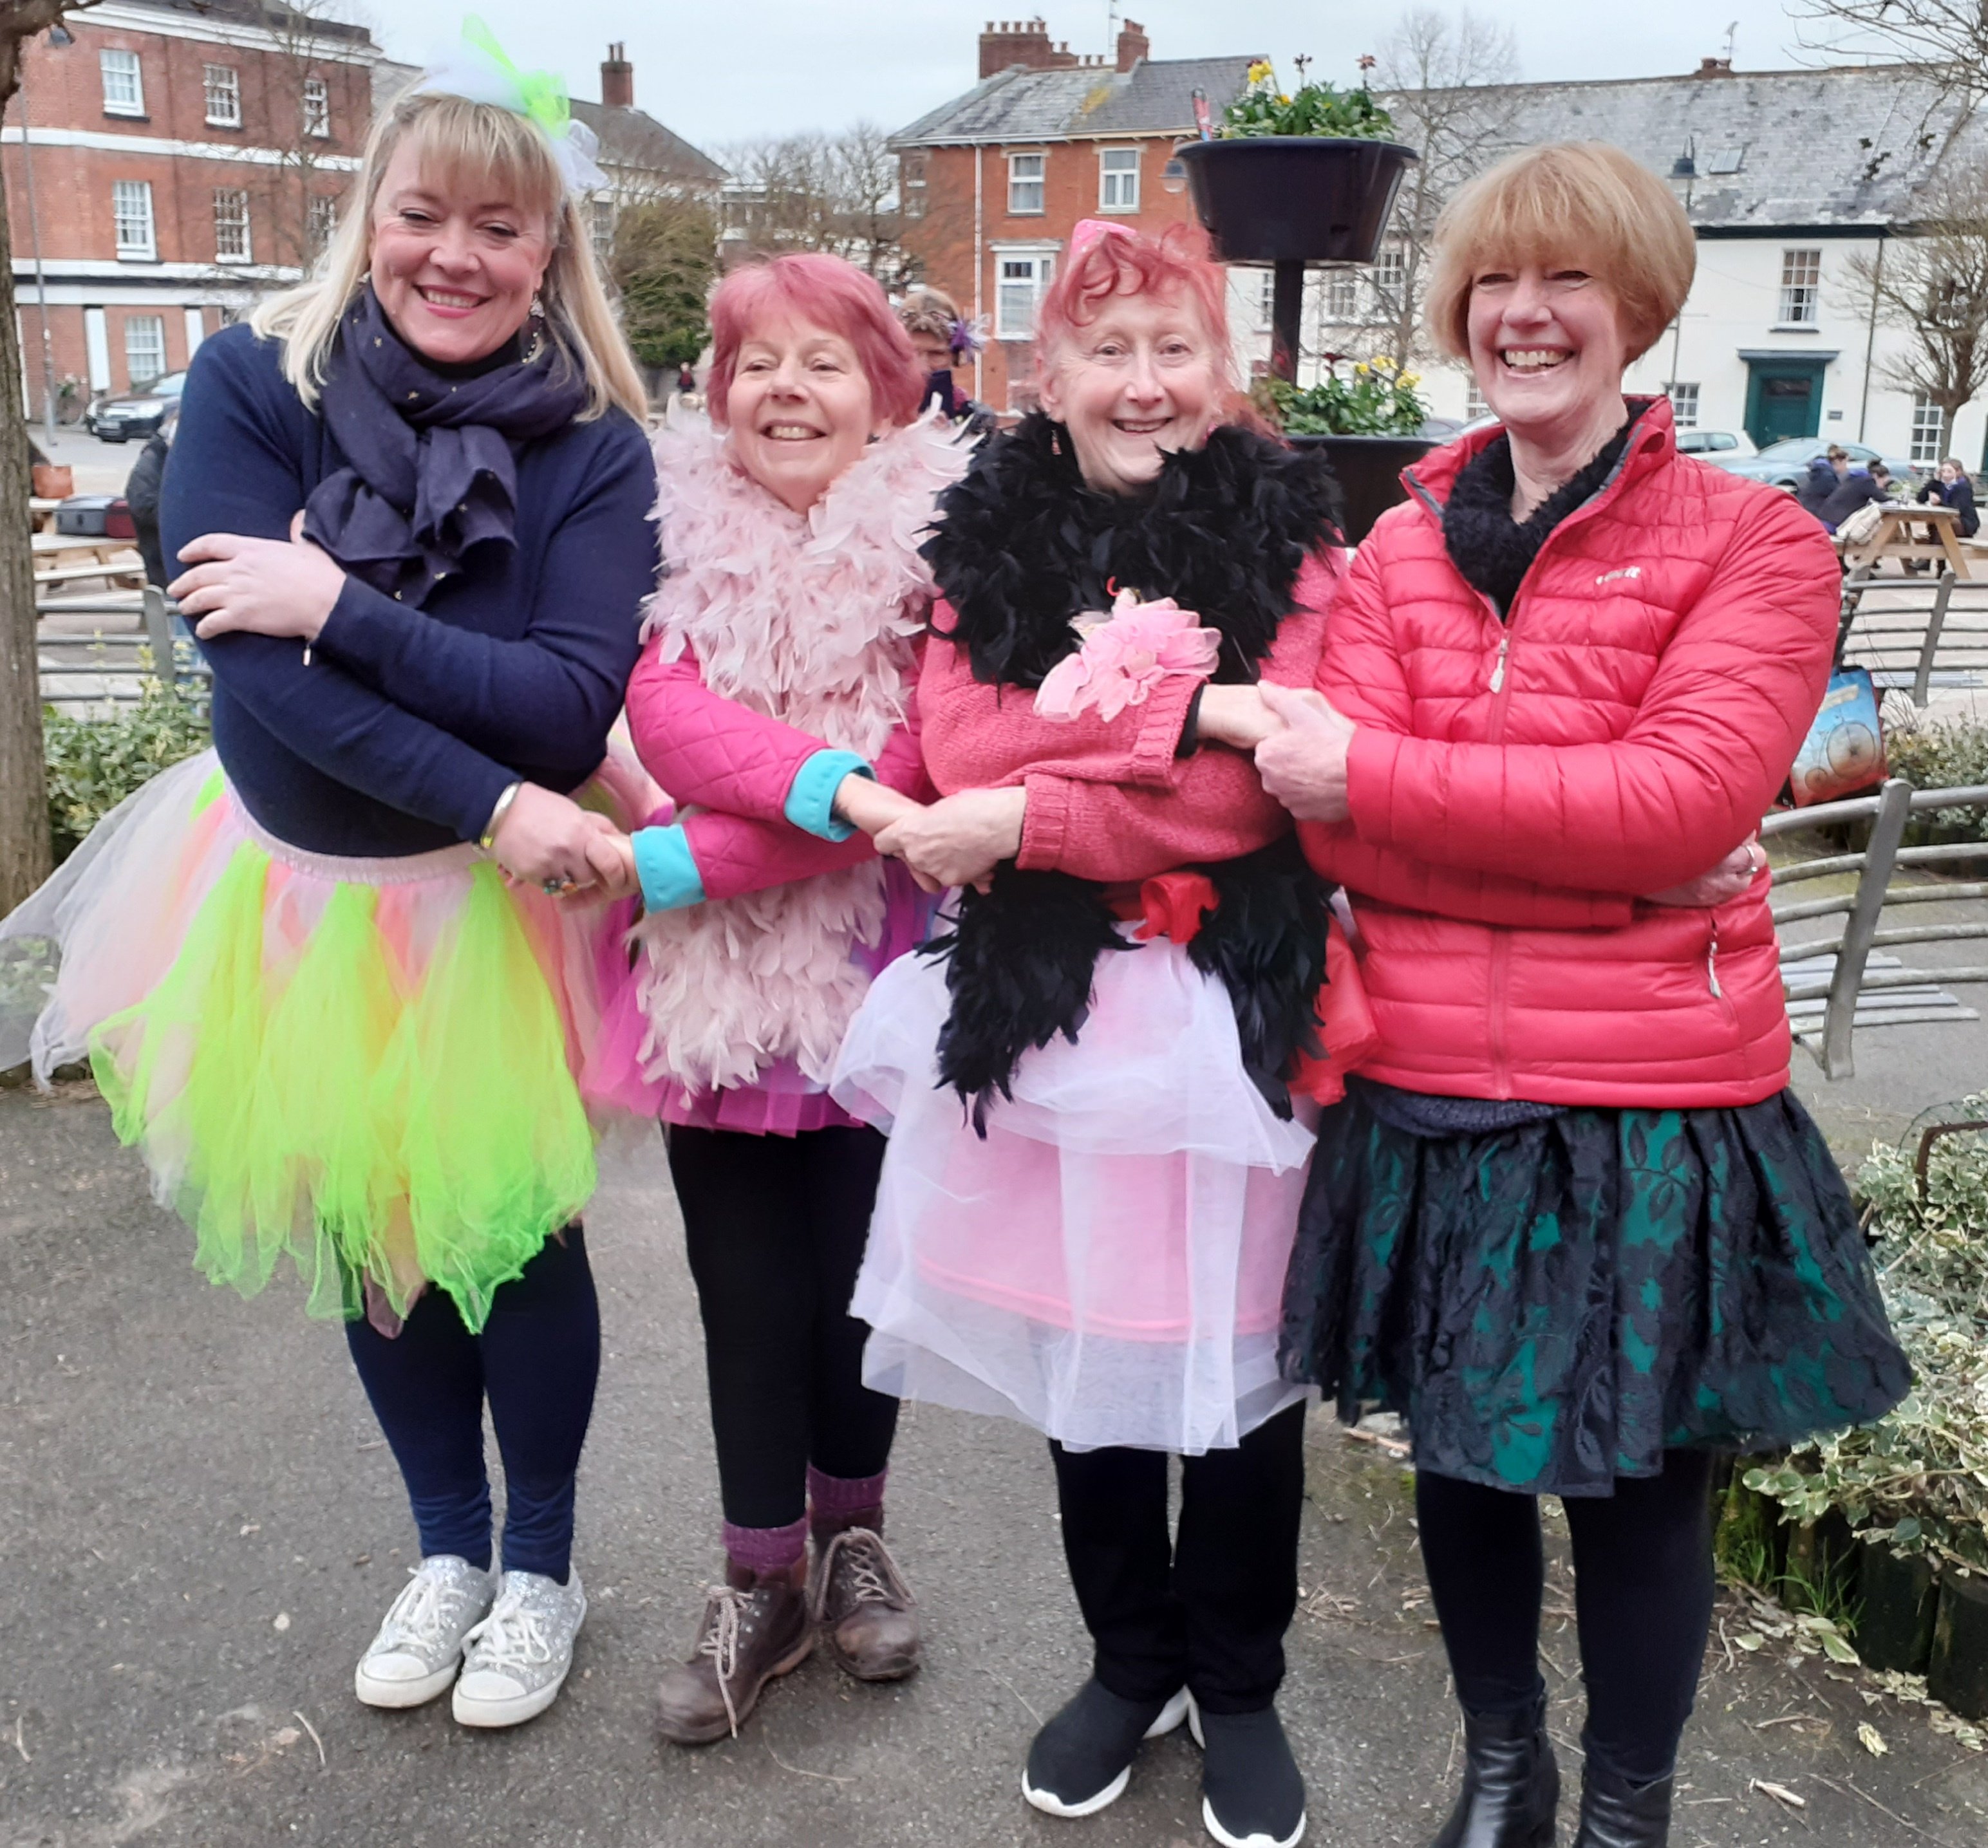 Take part in TuTu Day and workshops in Crediton | creditoncourier.co.uk